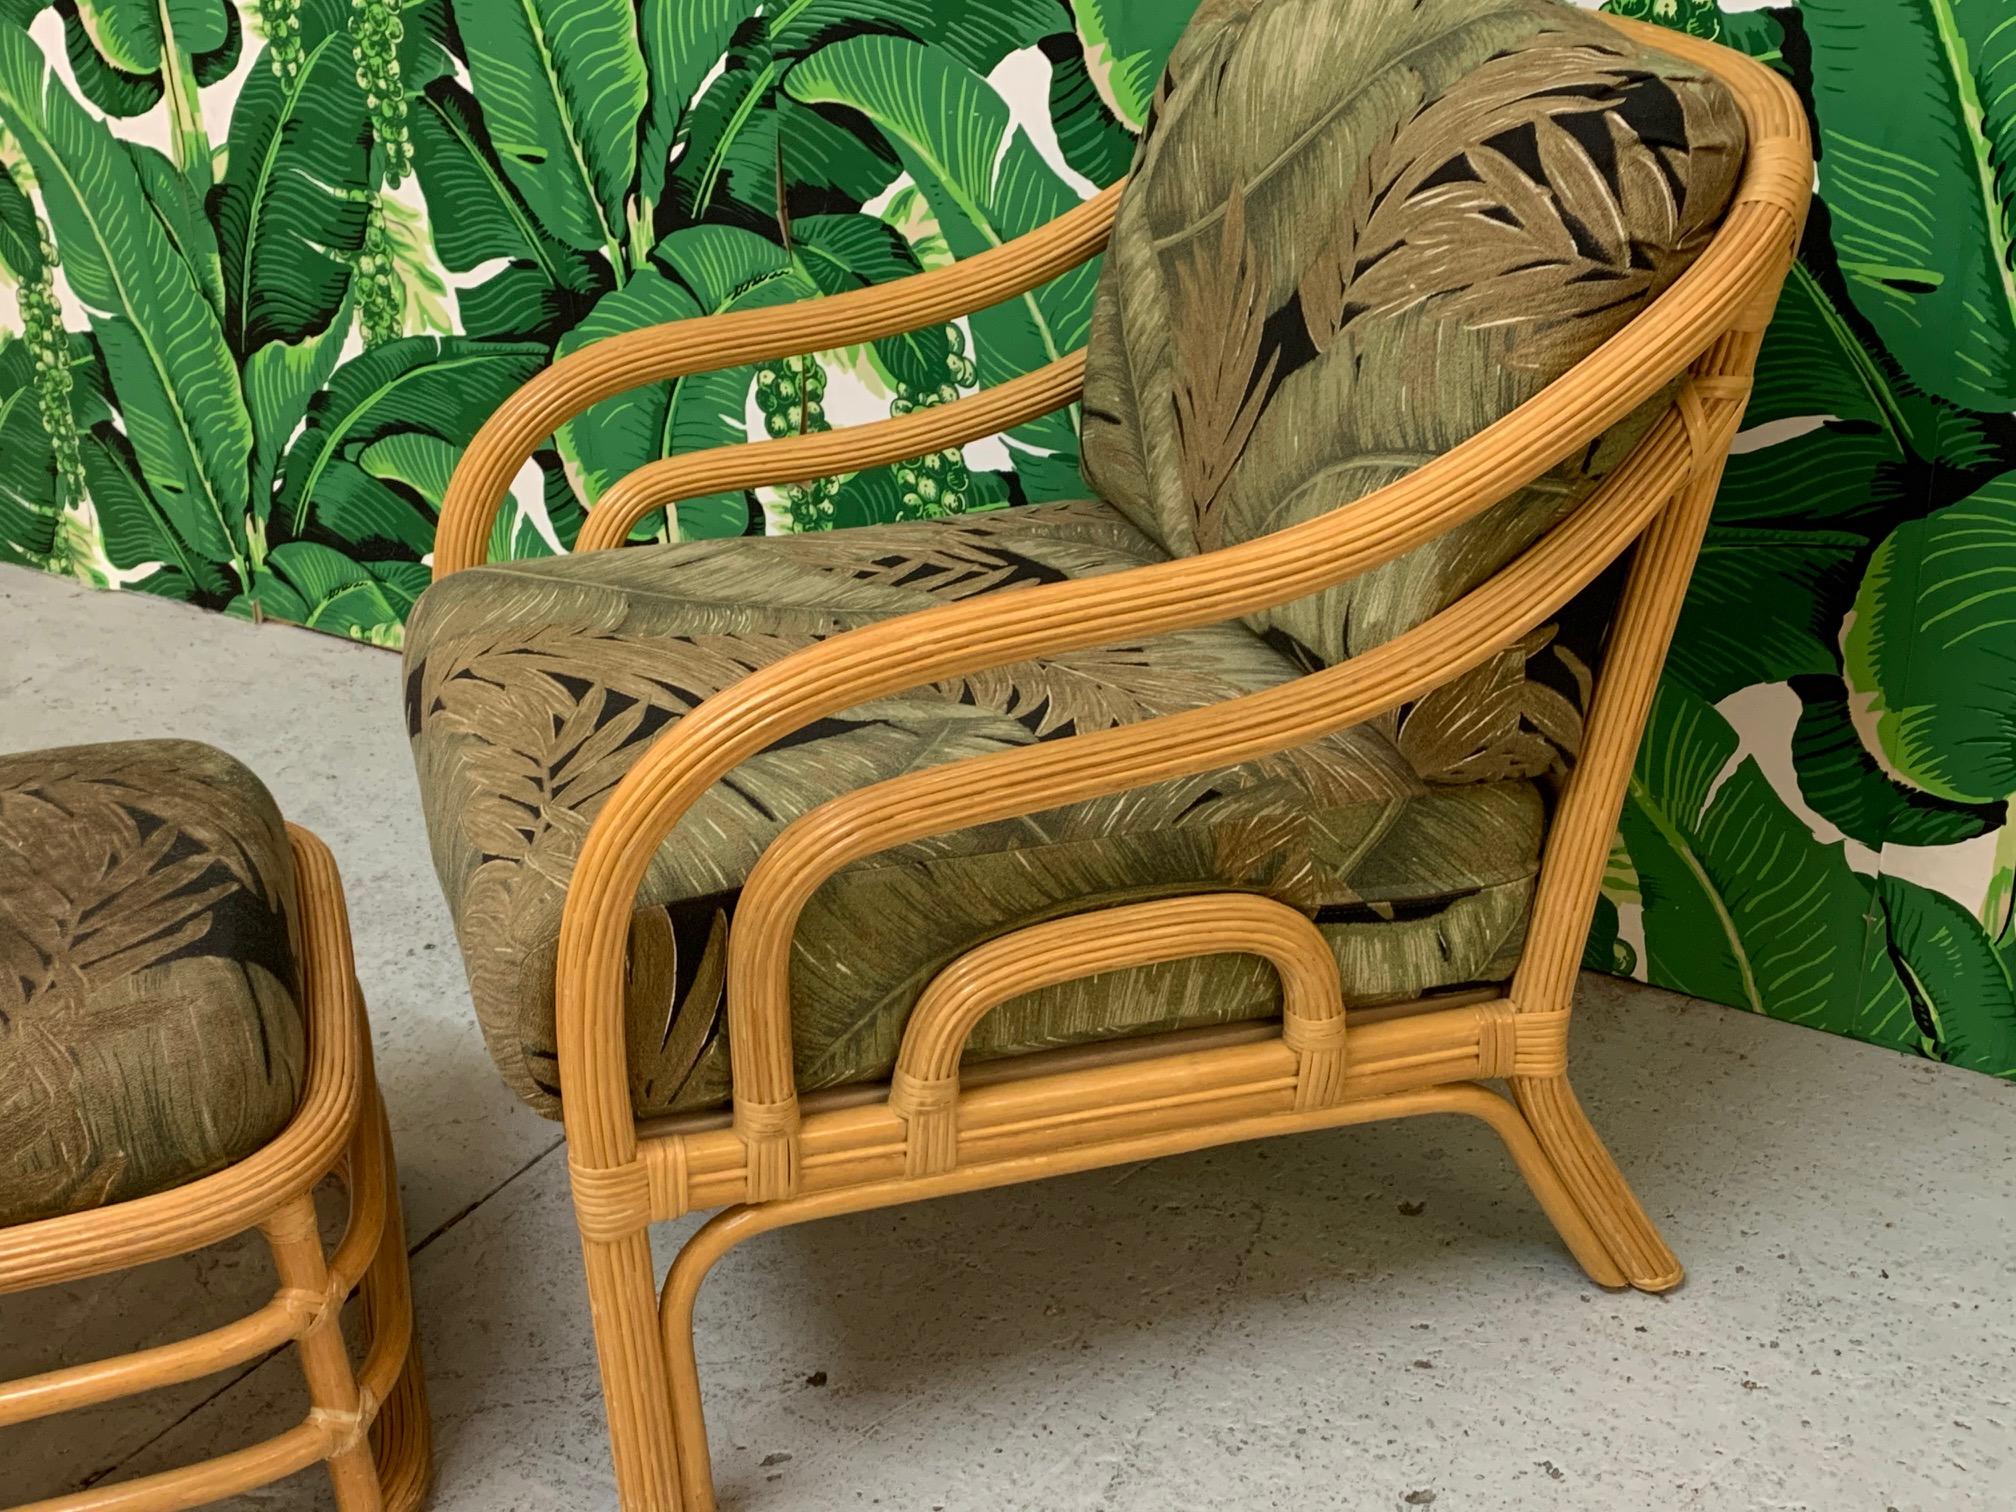 Vintage rattan lounge chair and matching ottoman feature a pencil reed or split reed frame and stacked horizontal design. Good condition with minor imperfections consistent with age. Chair measures 28